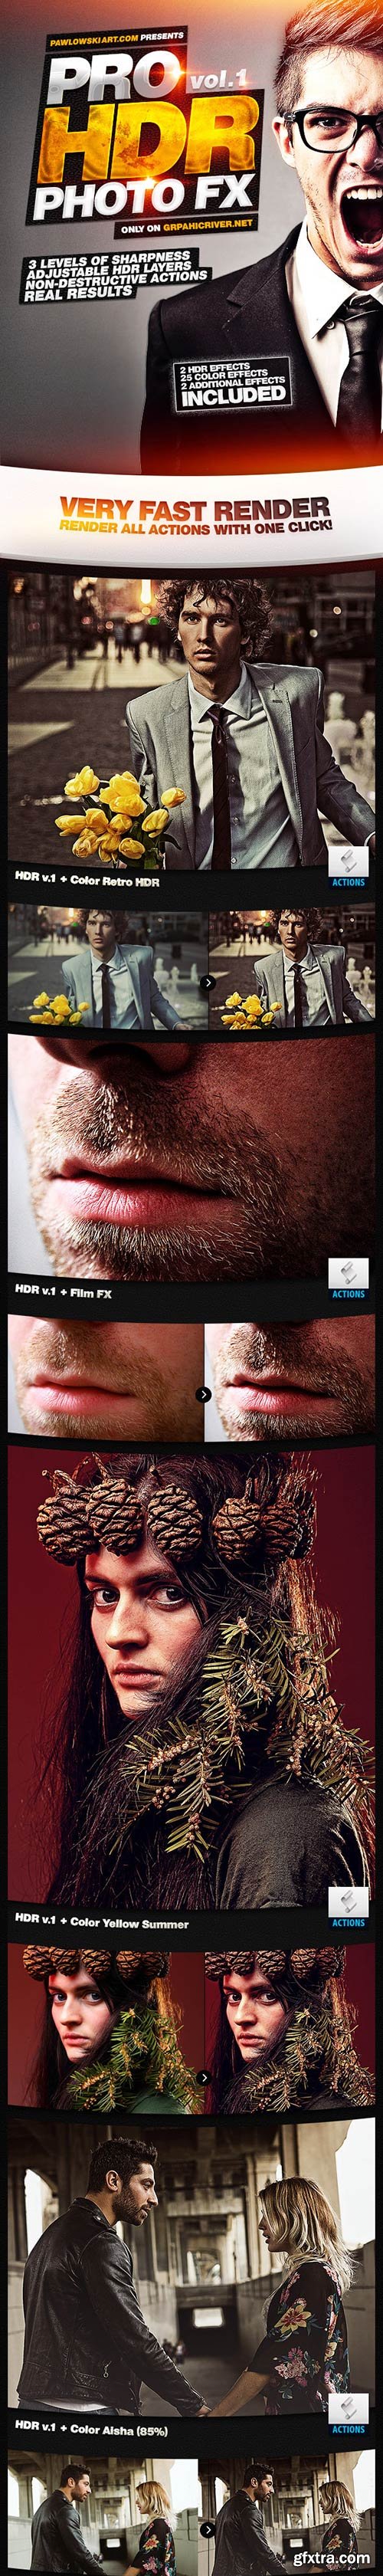 GraphicRiver - Pro HDR Photo FX vol.1 - 25 HDR Photoshop Actions